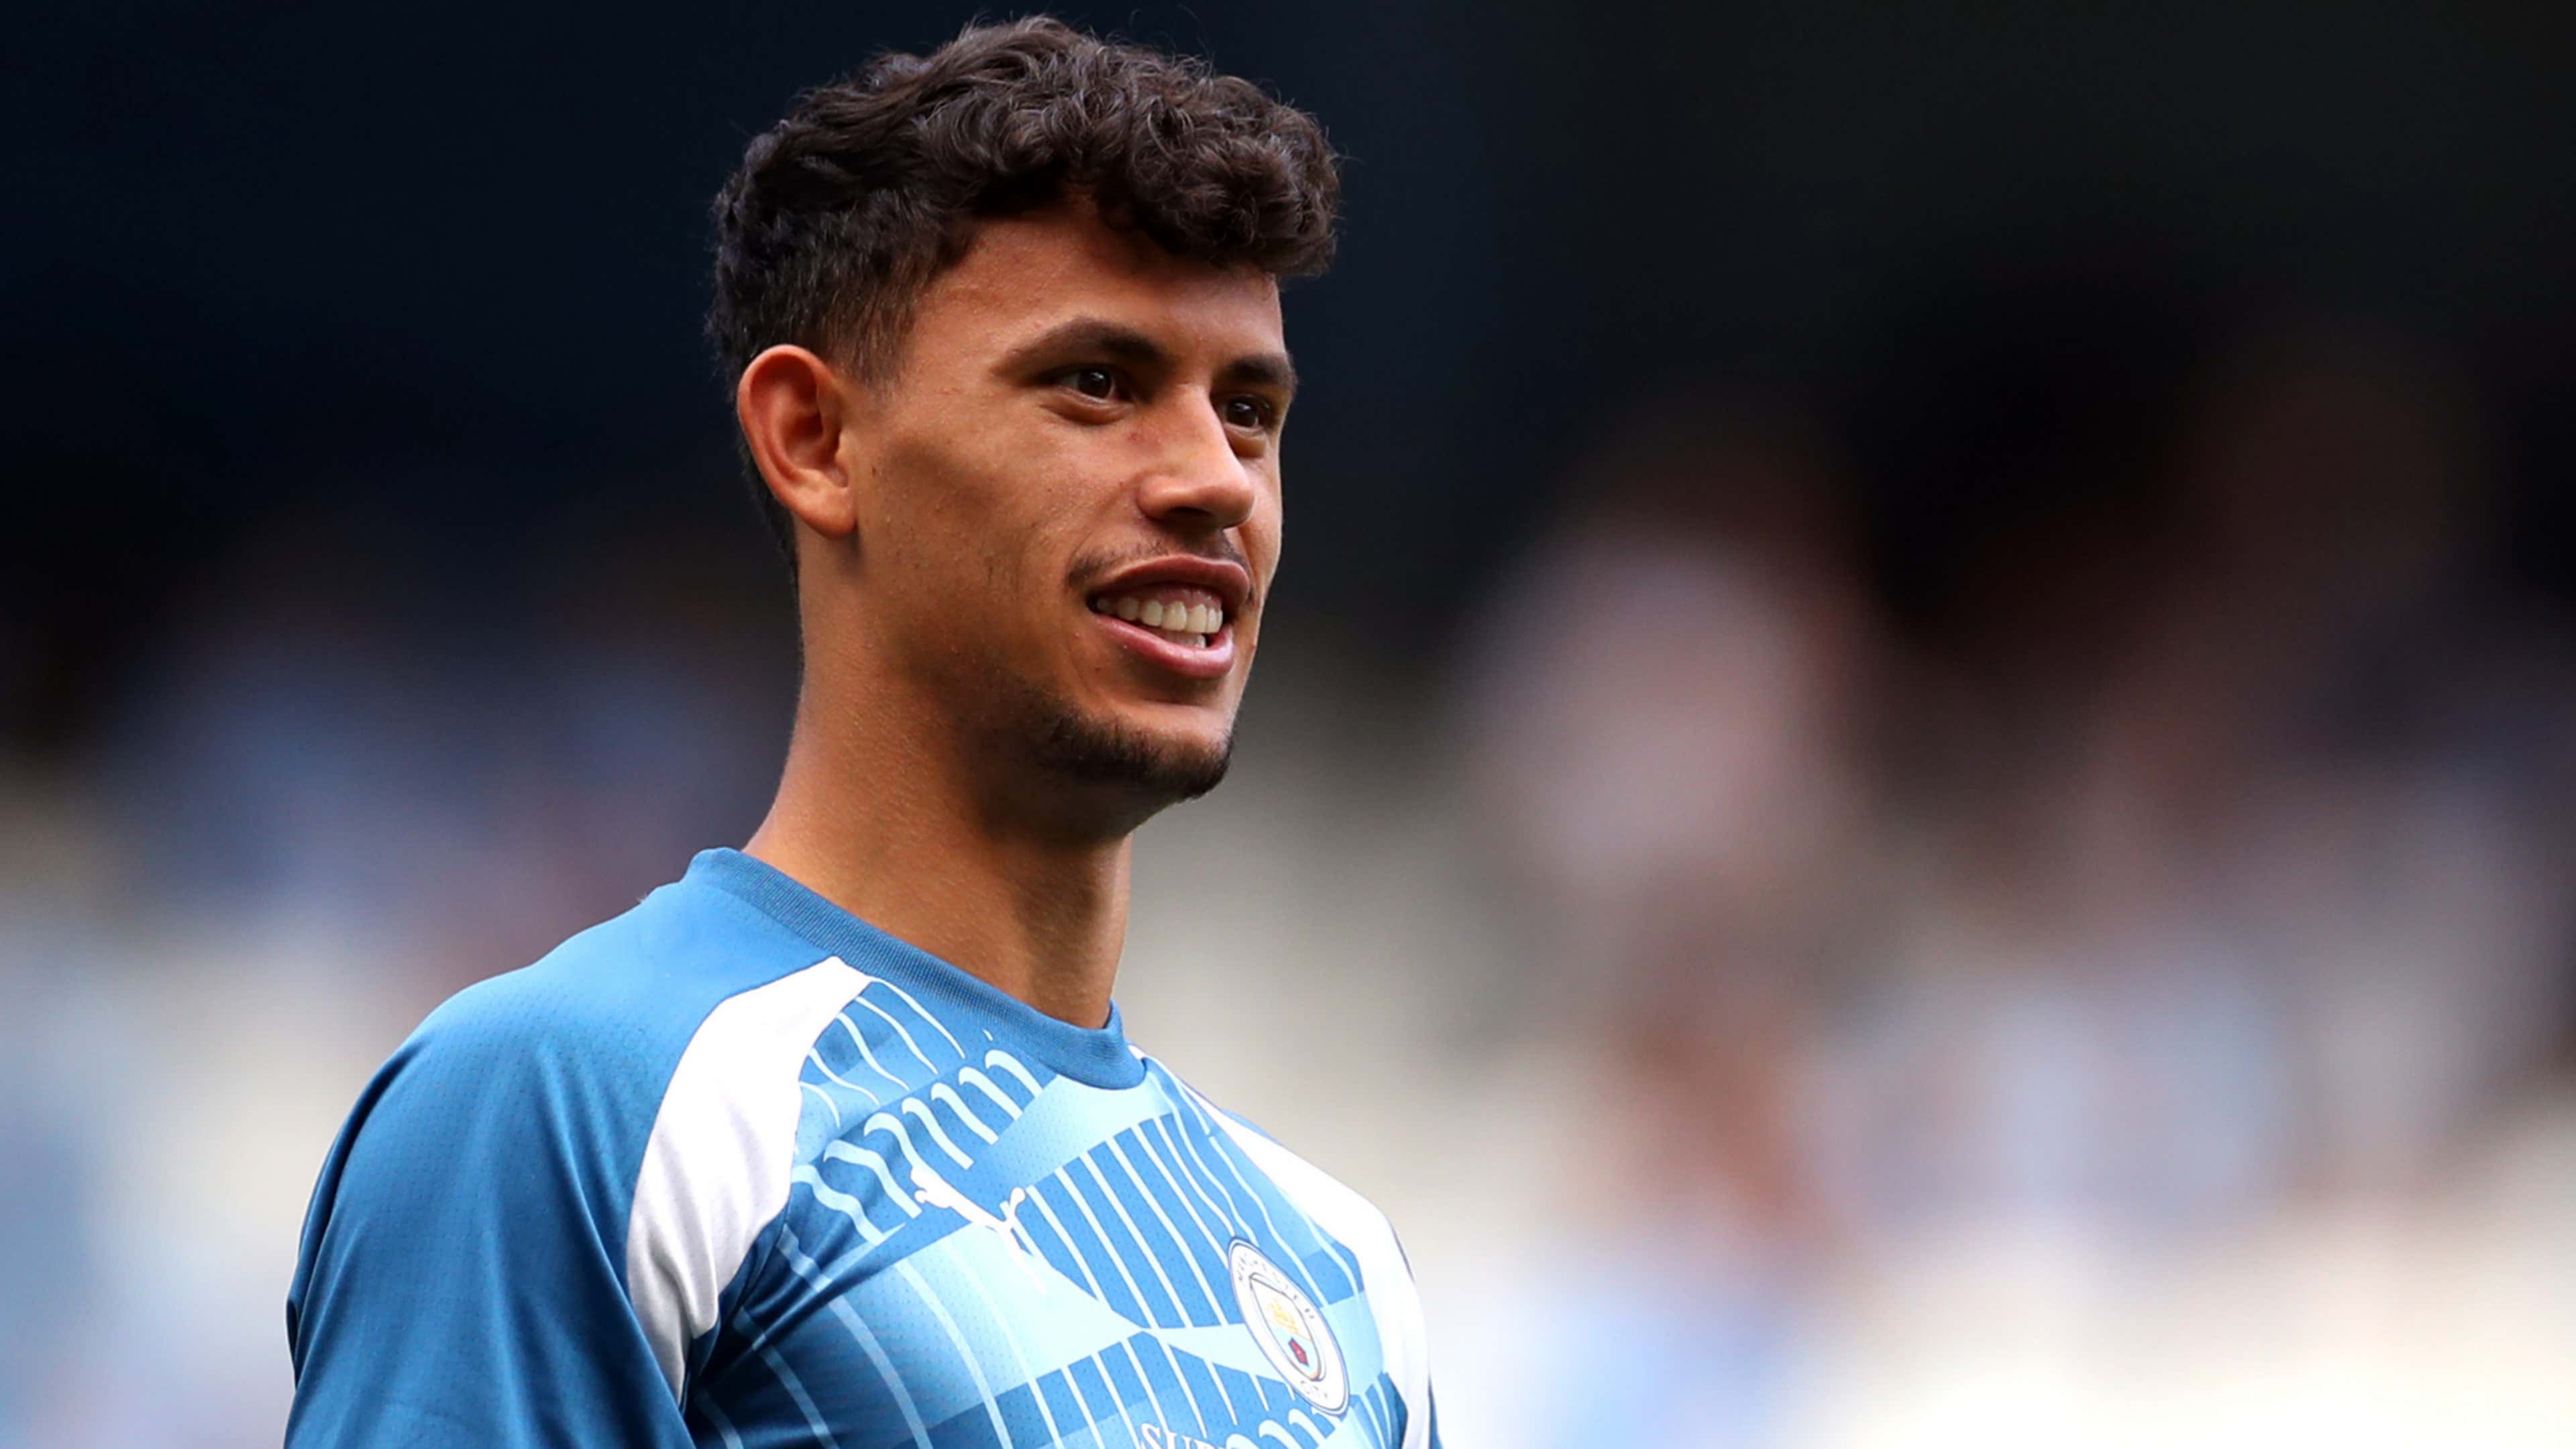 Pep Guardiola says Matheus Nunes has a 'quality that is so difficult to find' as Portuguese midfielder gears up for first Man City minutes | Goal.com US